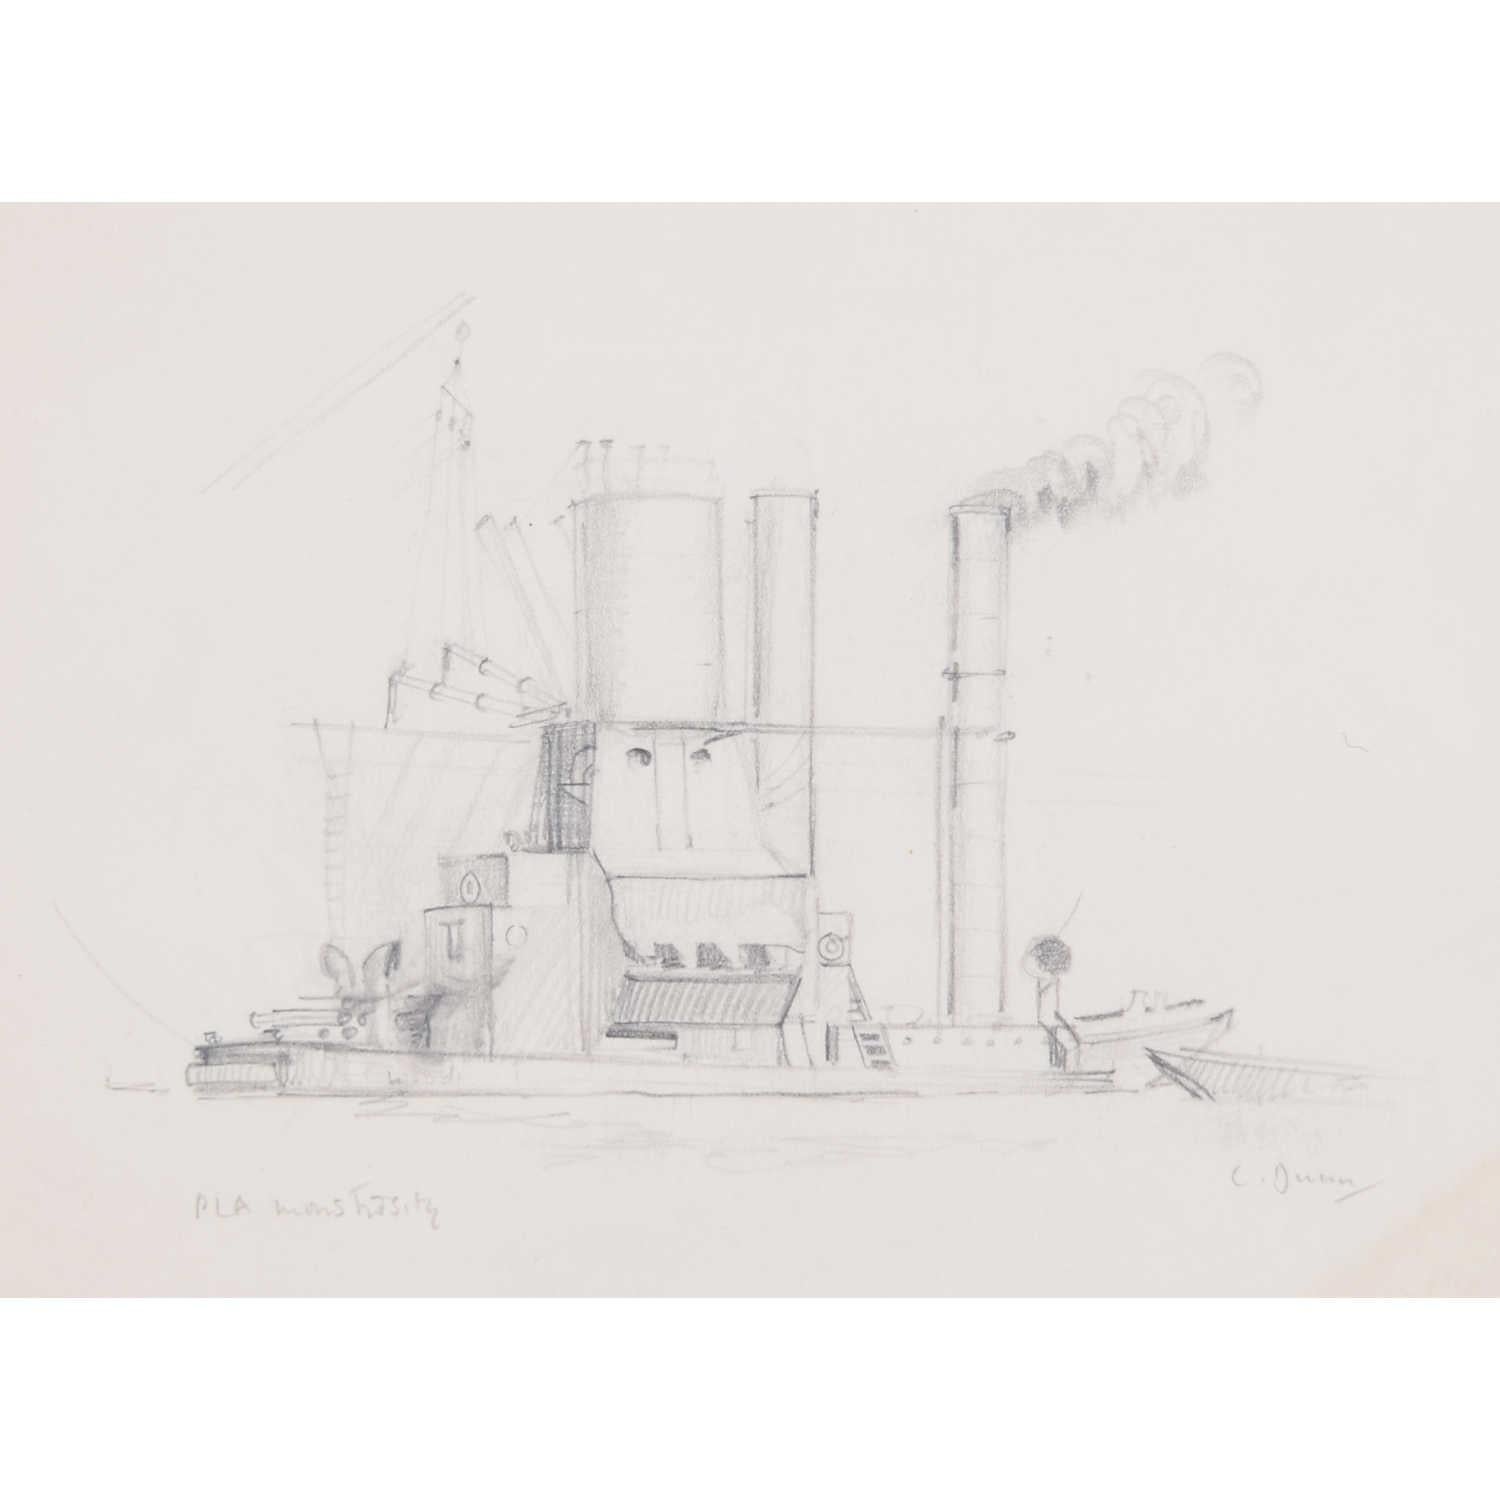 Laurence Dunn, Port of London Authority Ship 'PLA Monstrosity' Drawing (c1950s) 